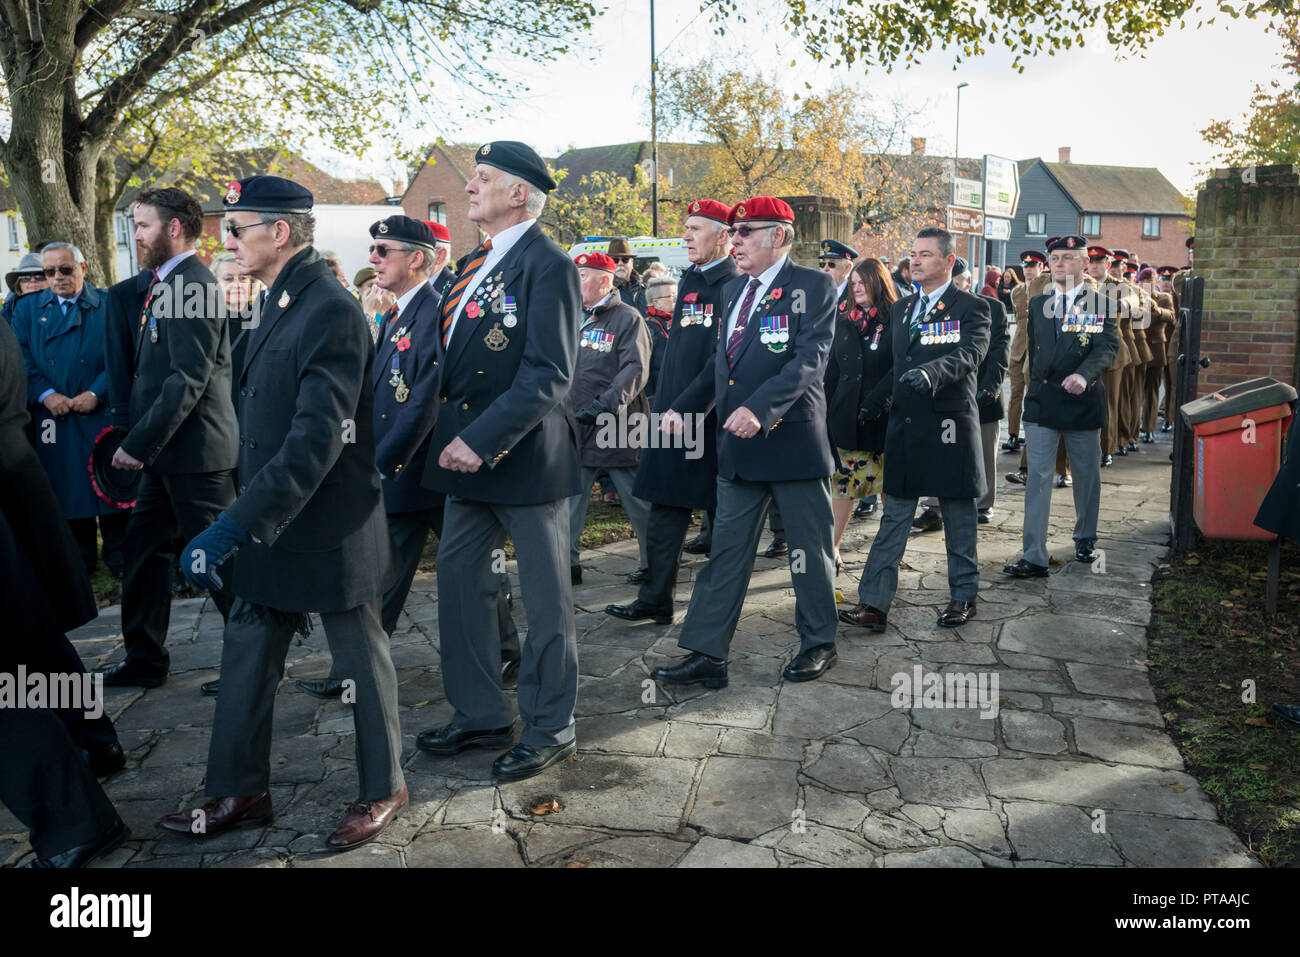 Remembrance Sunday parade, veterans march through the city of Chichester, West Sussex, UK. Stock Photo